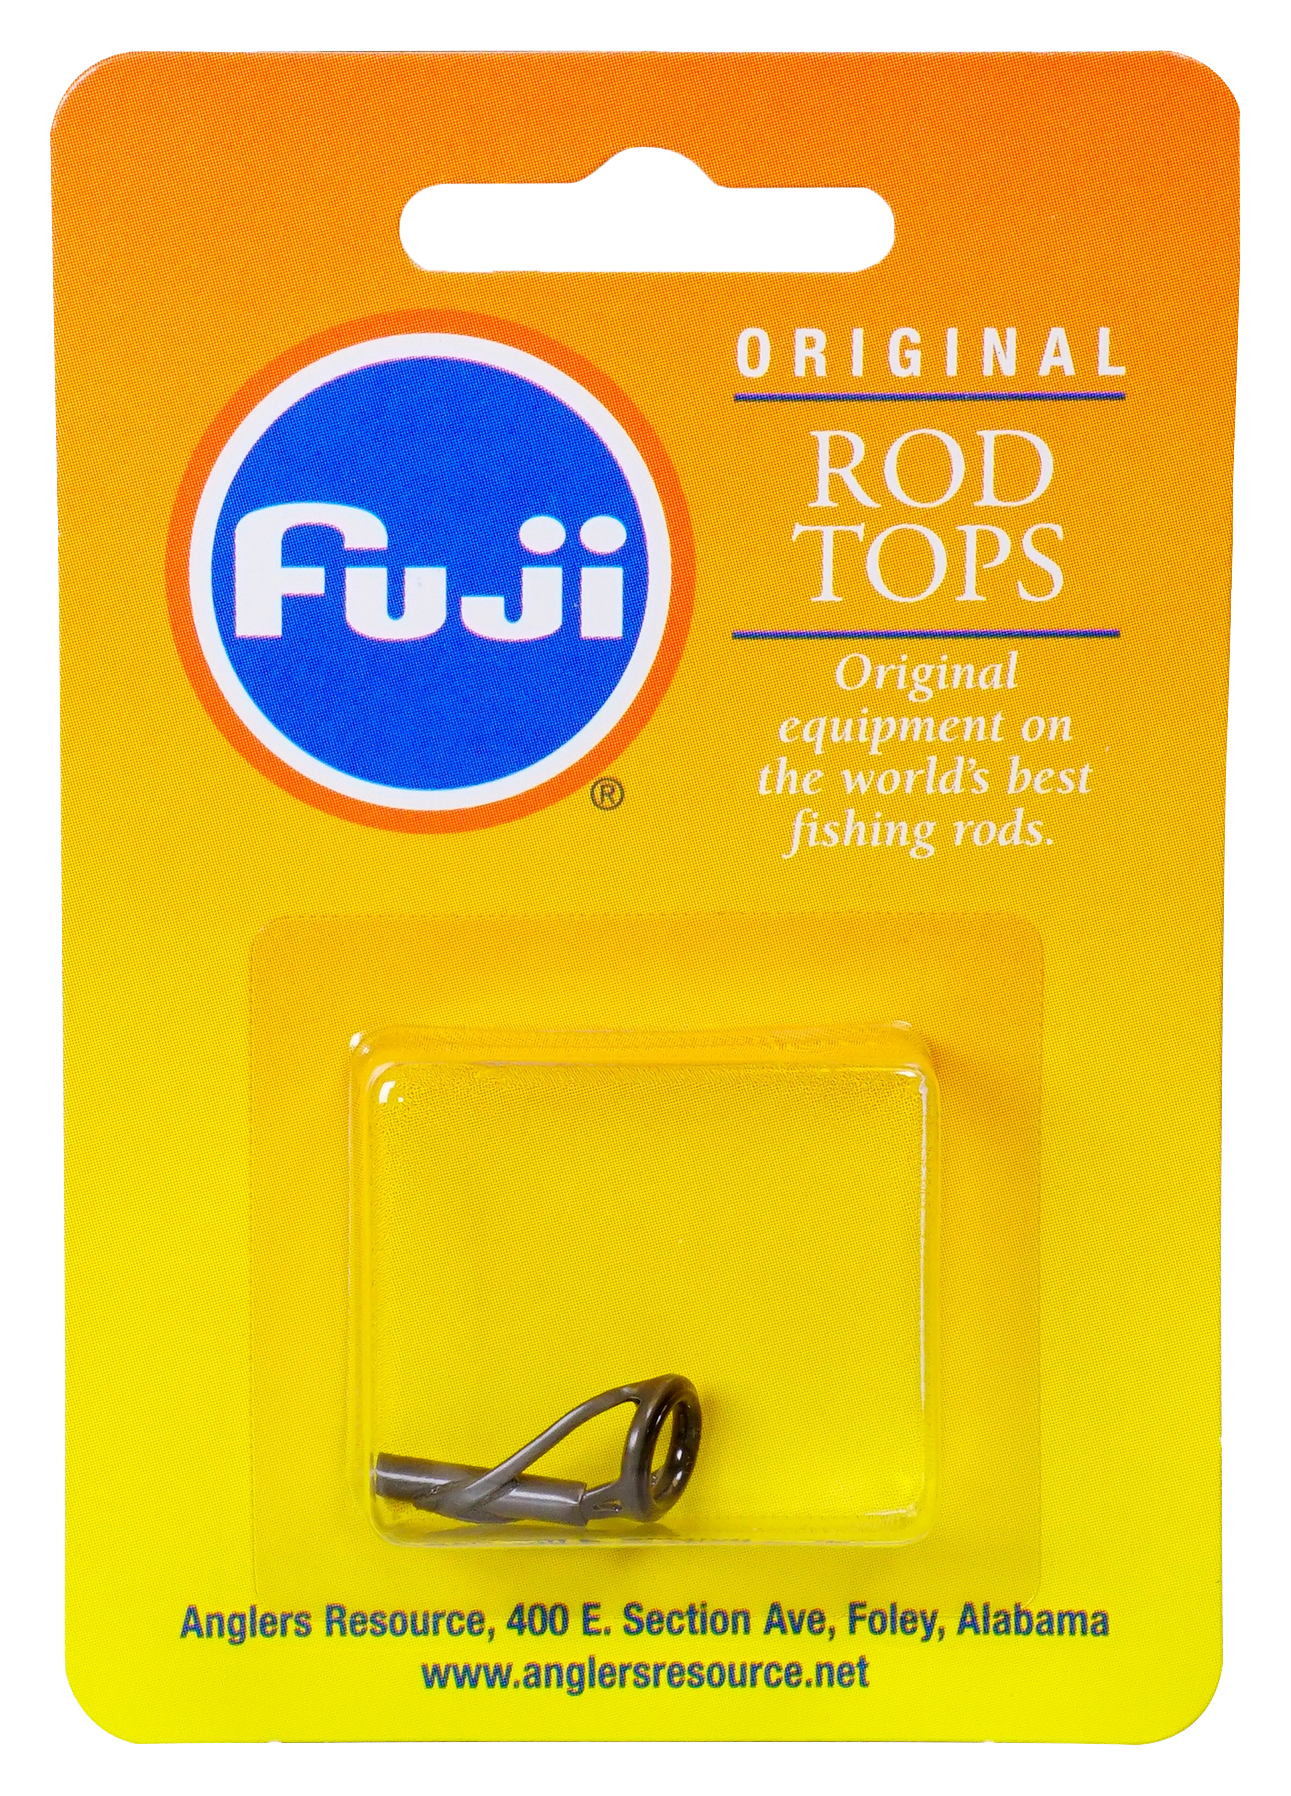 how to fix's your rods with the Fuji & Ozark trail fishing rod repair kit's  and save money 